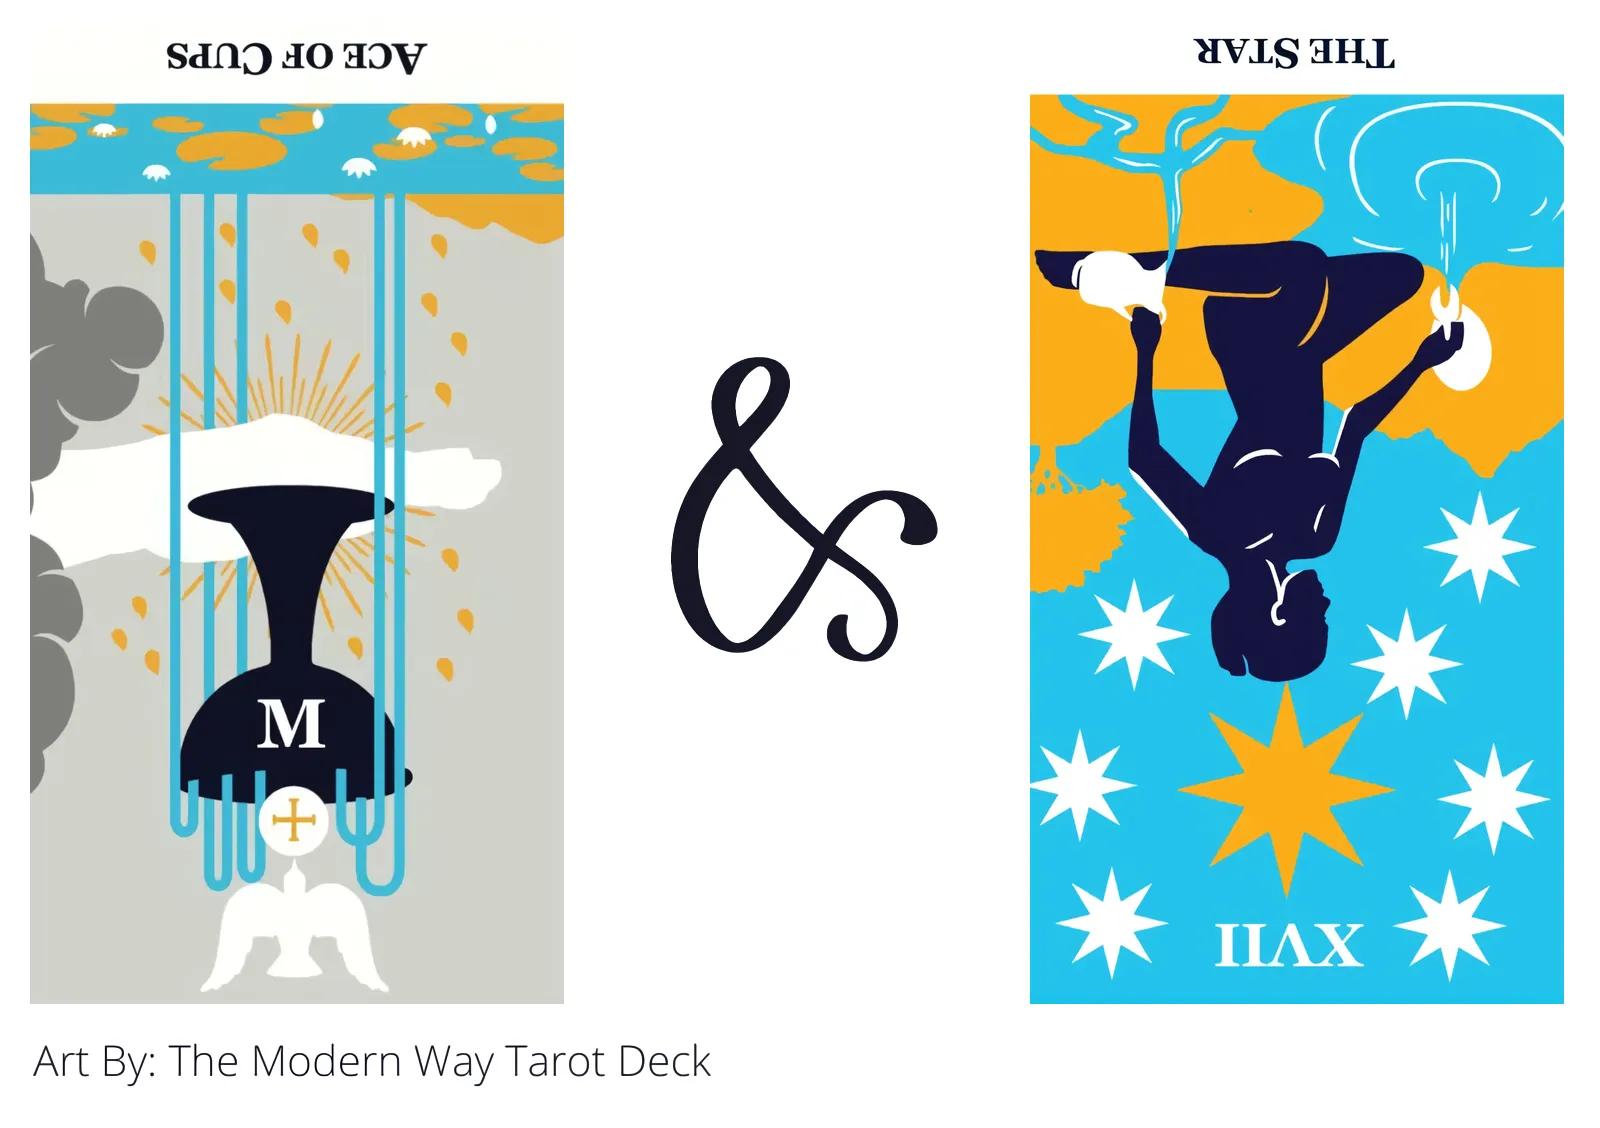 ace of cups reversed and the star reversed tarot cards together